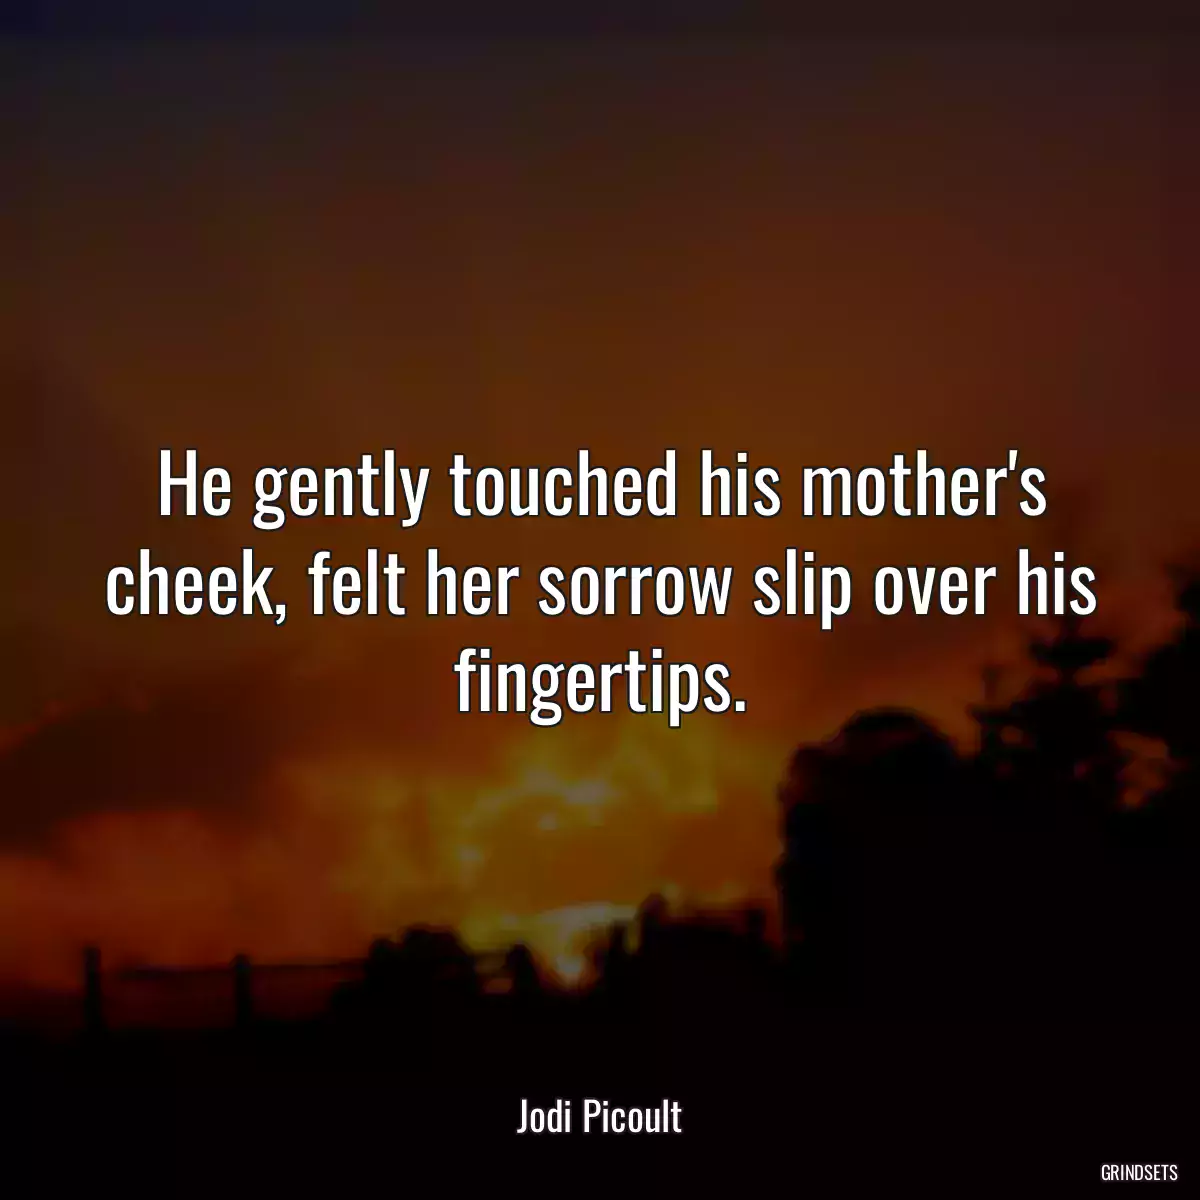 He gently touched his mother\'s cheek, felt her sorrow slip over his fingertips.